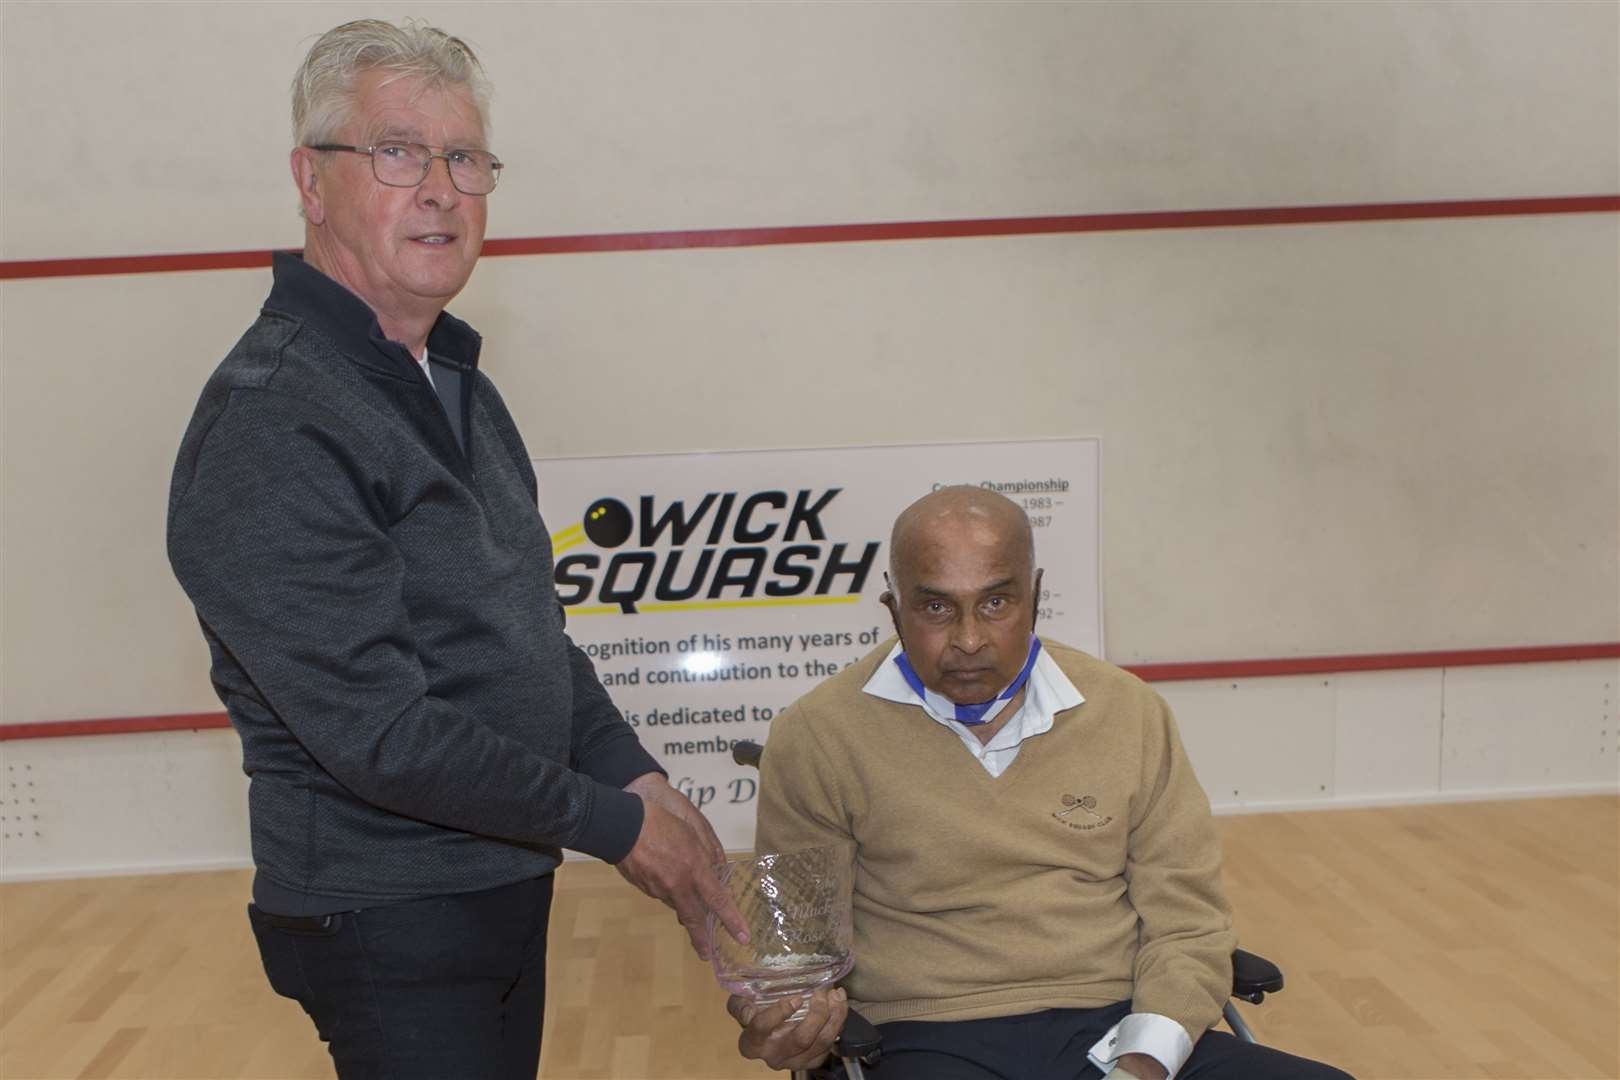 Pradip Datta presents Roy Mackenzie with the Mackenzie Rose Bowl, an engraved glass trophy marking their many years of friendly rivalry in various competitions at Wick Squash Club. Roy has handed the trophy over to the club where it will be competed for annually as a league trophy. Picture: Robert Macdonald / Northern Studios